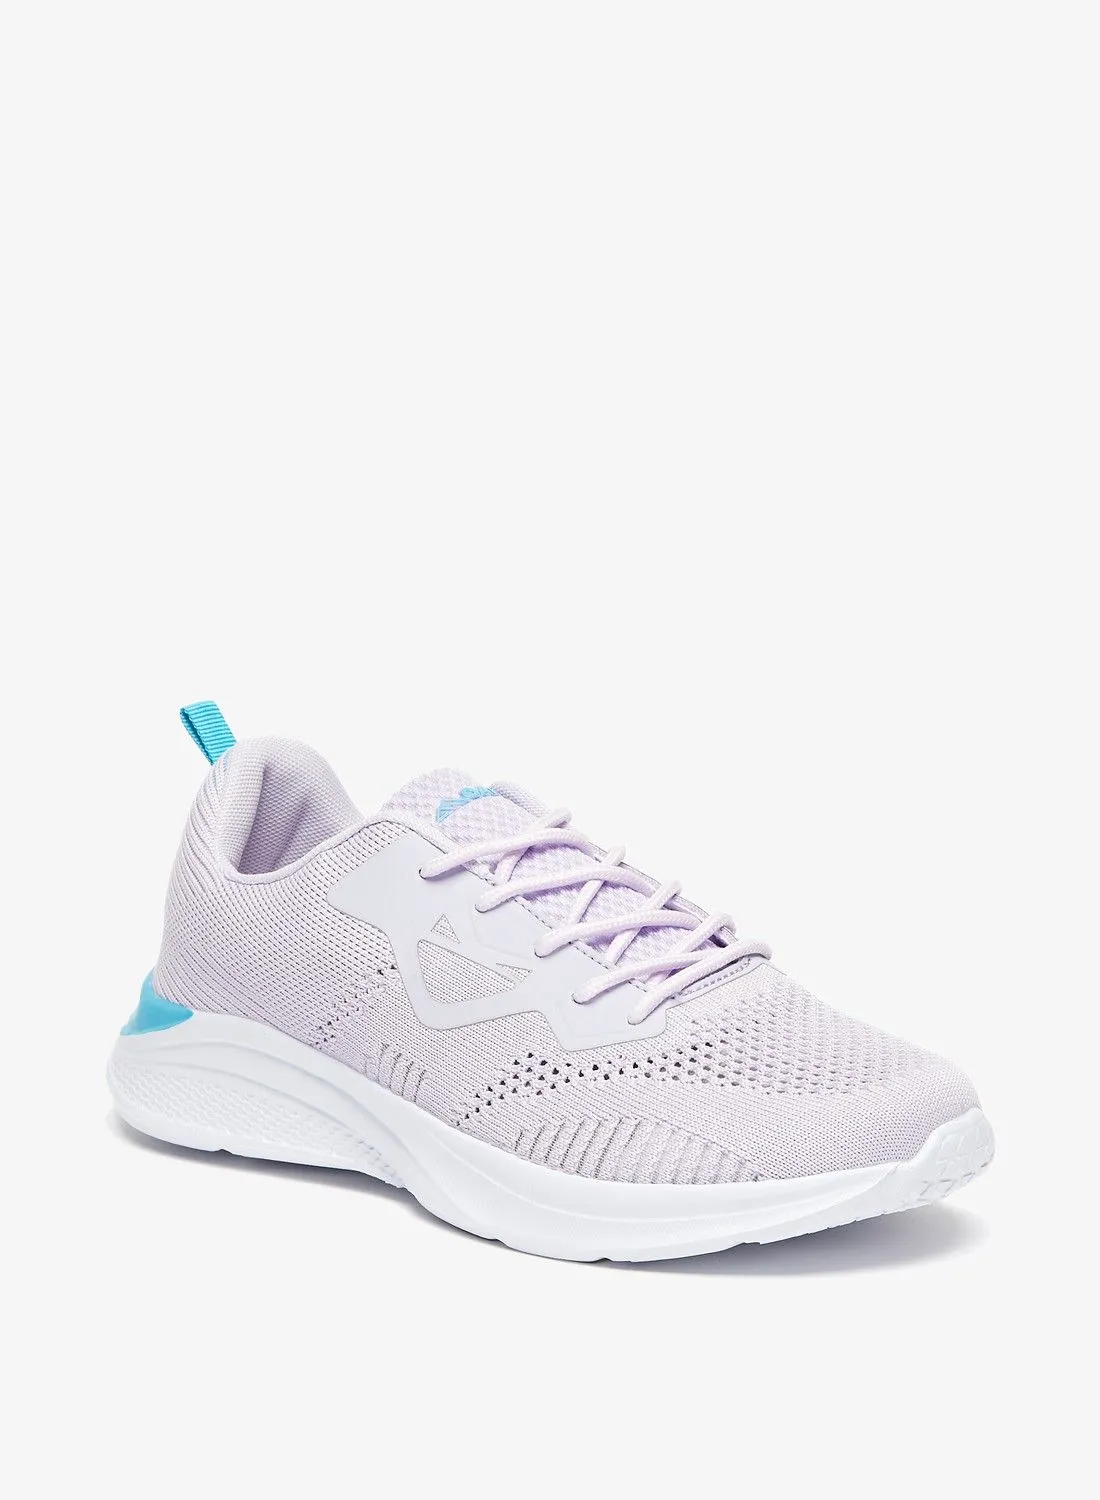 OAKLAN Textured Running Shoes with Lace-Up Closure